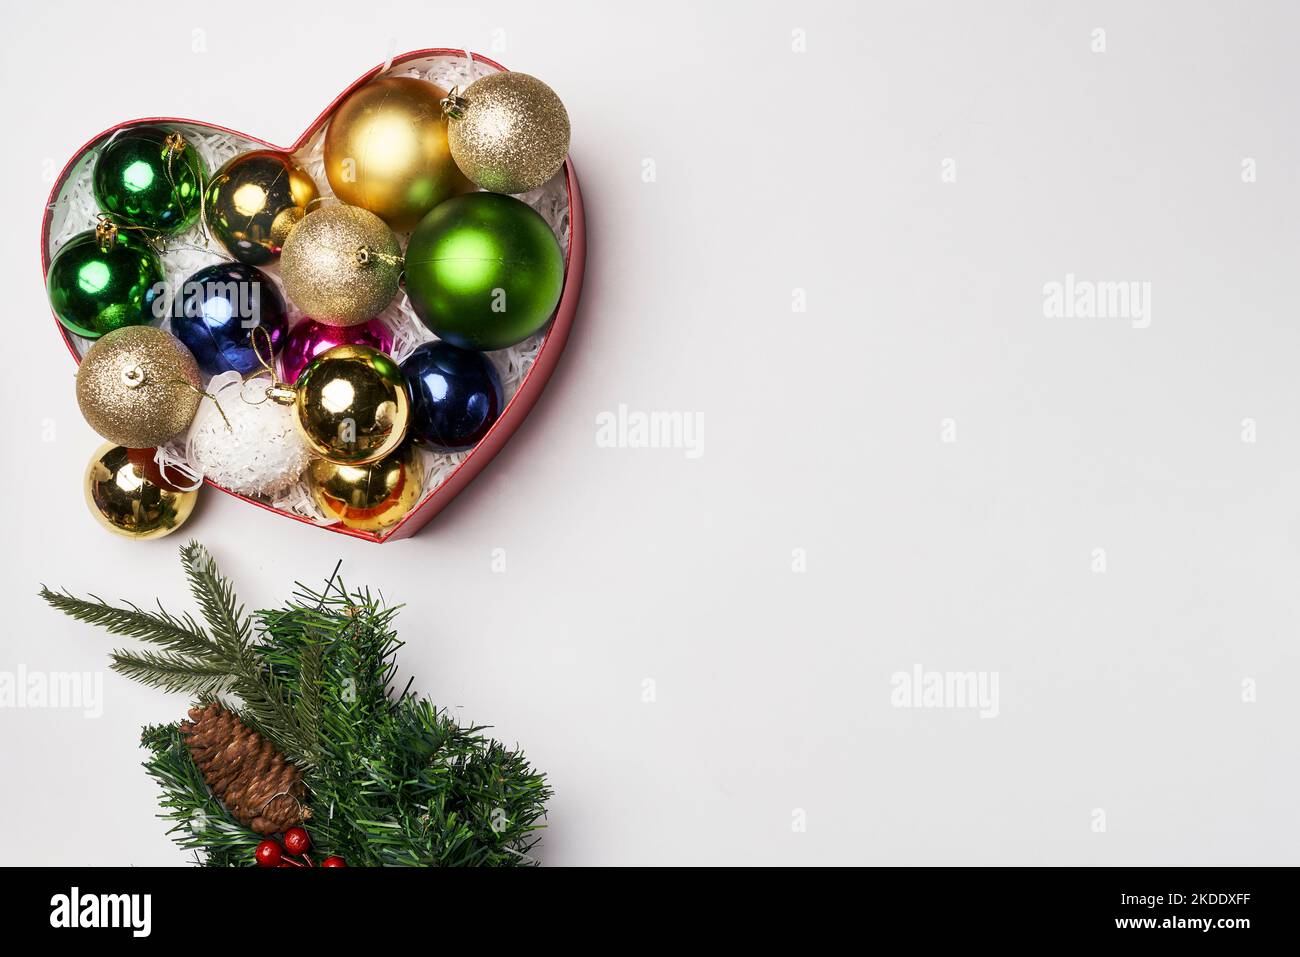 christmas ornaments in a heart shaped box on a white background with copy space for your own text or other contents Stock Photo